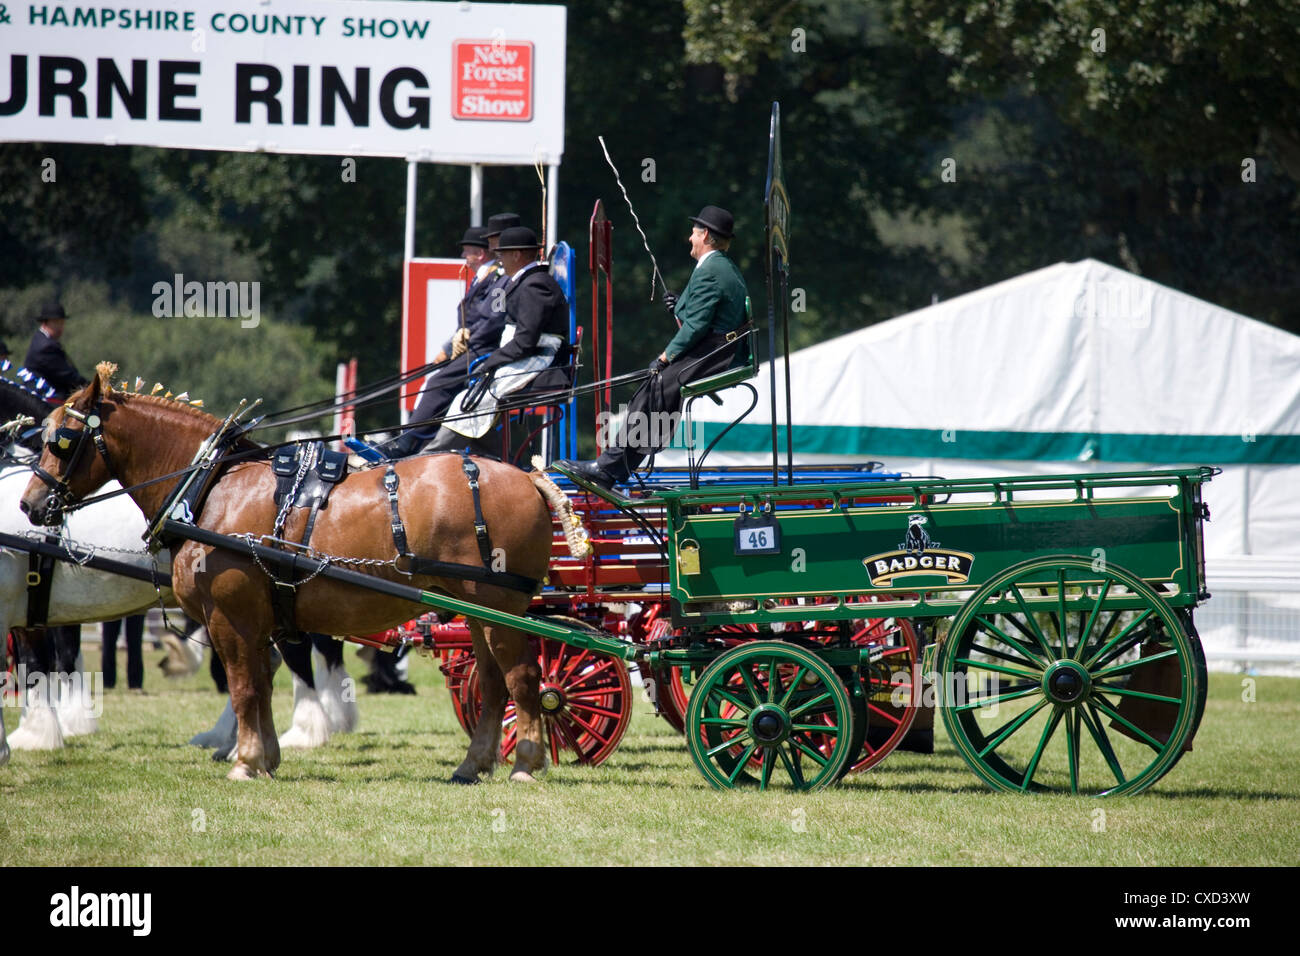 Horse and cart at the new forest show 2012 Stock Photo